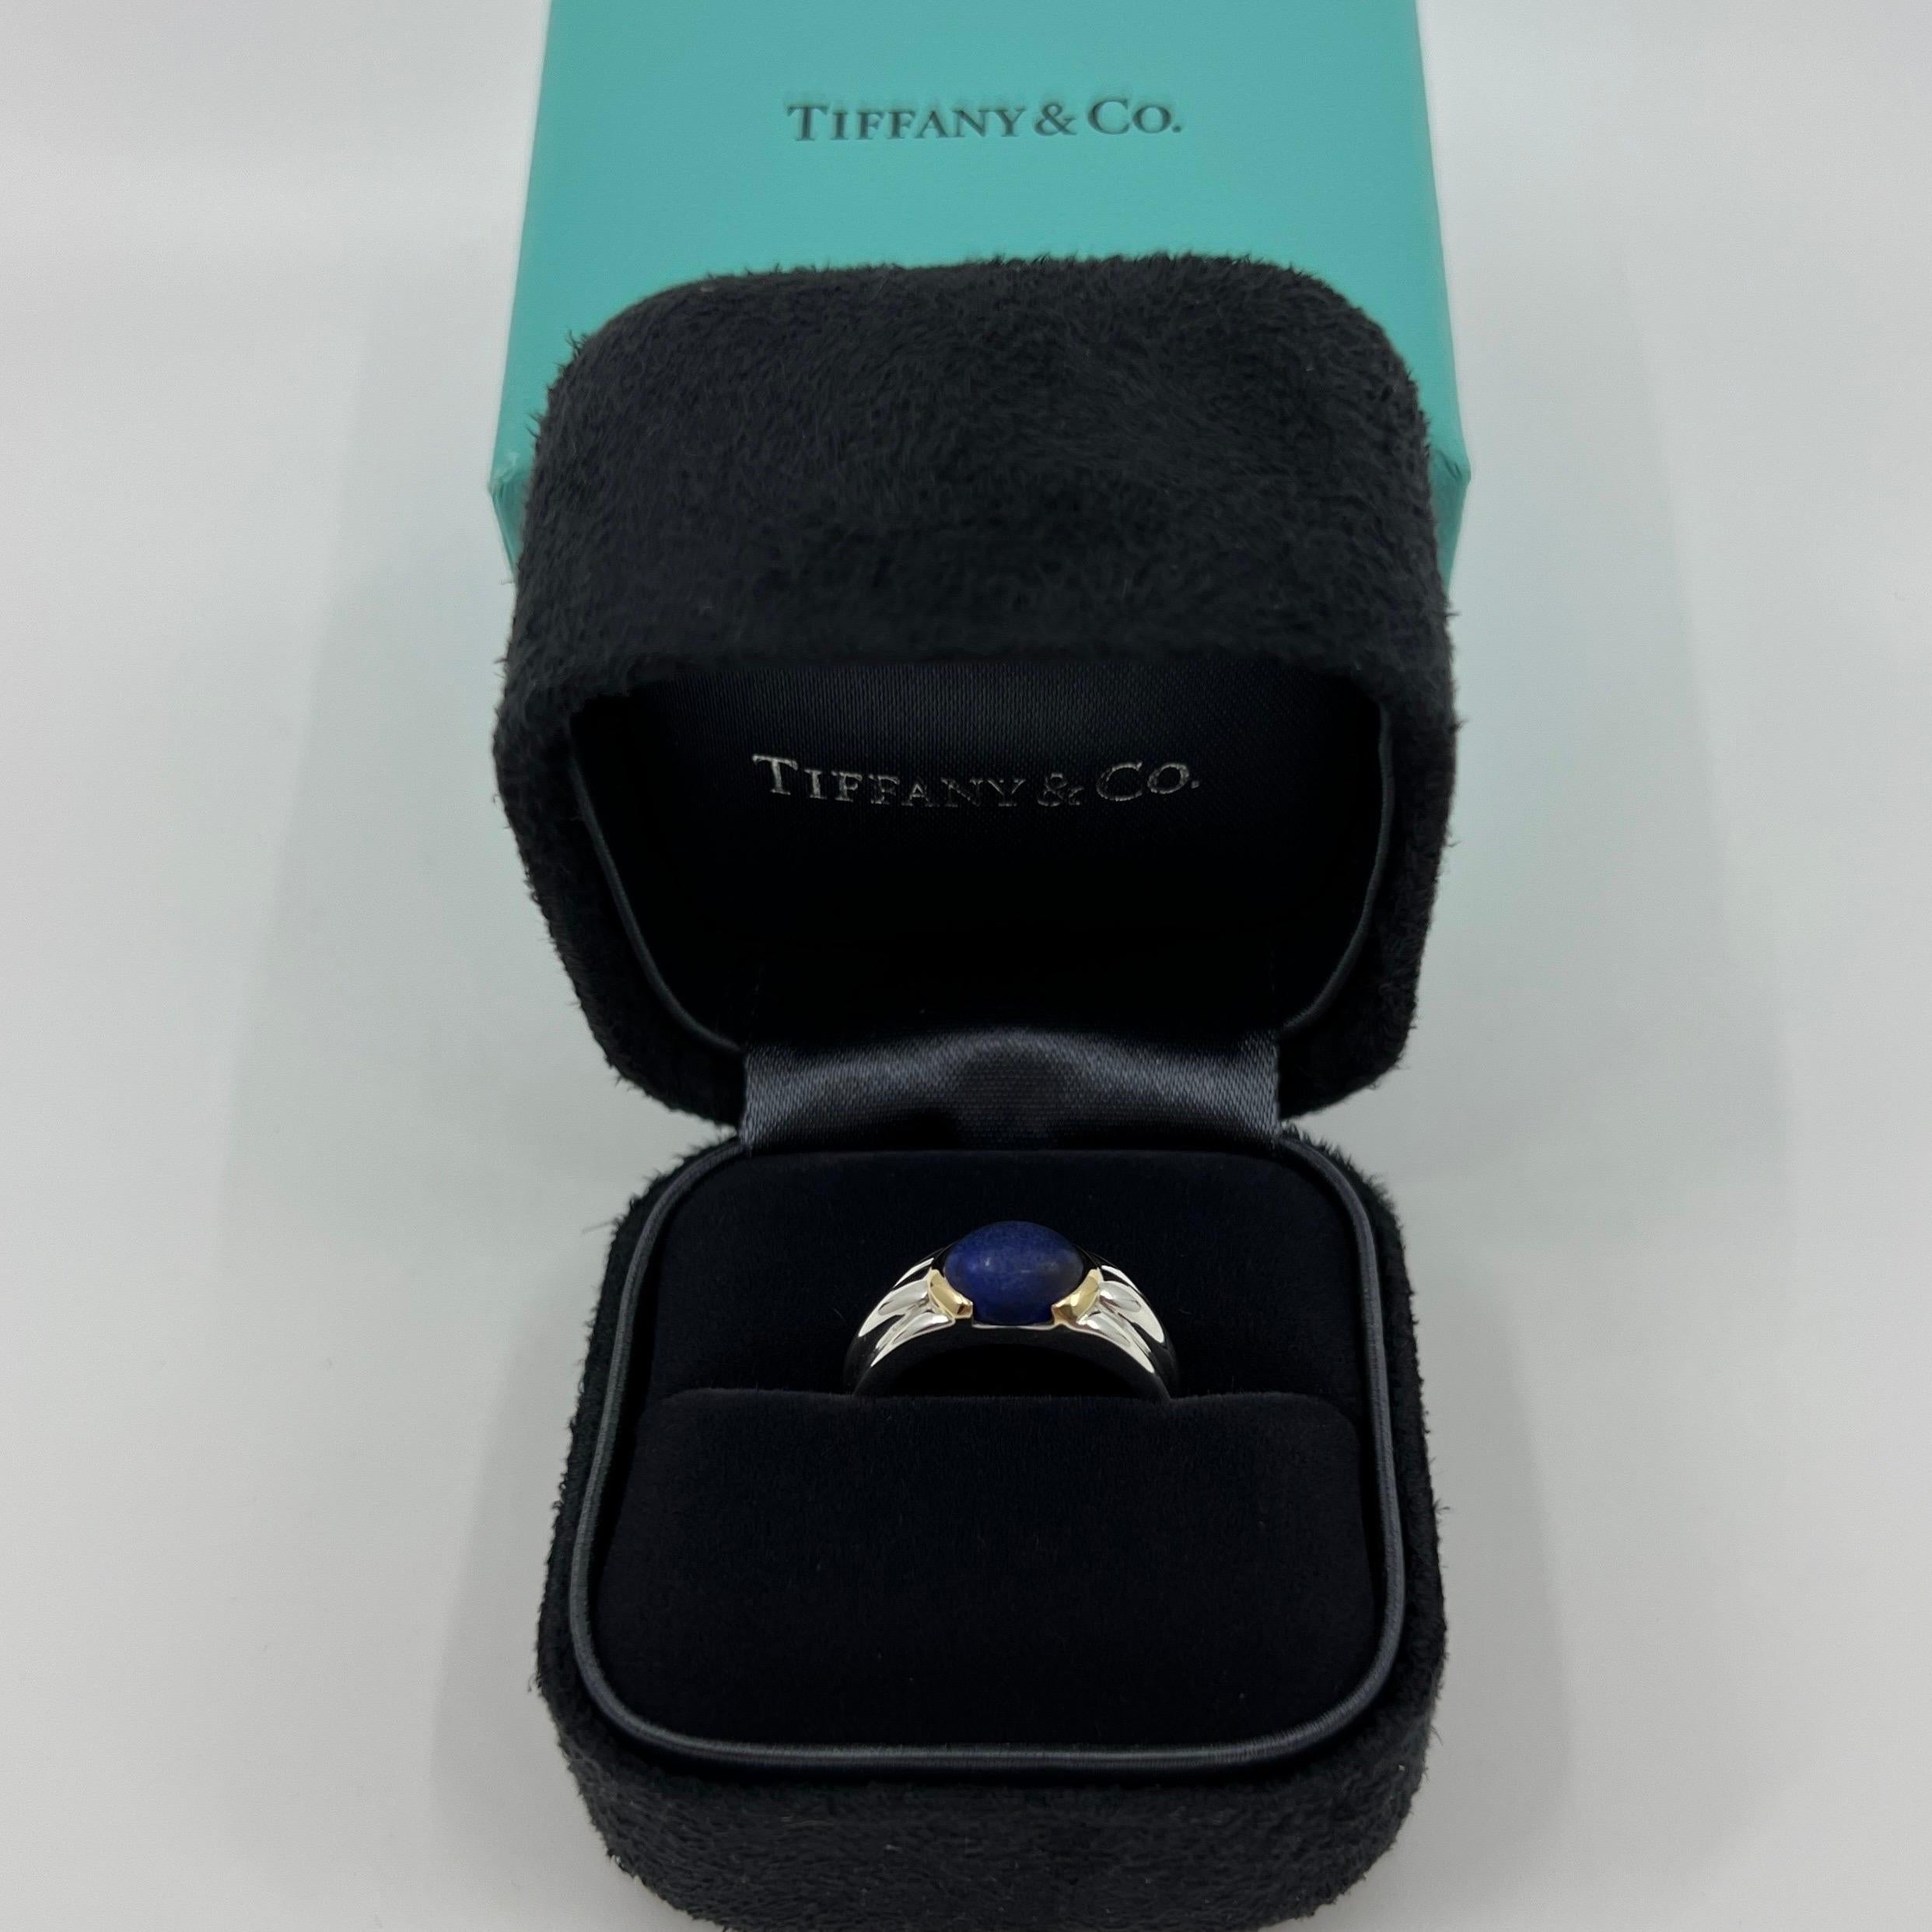 Rare Vintage Tiffany & Co. Blue Oval Cabochon Lapis Lazuli 18k Yellow Gold & Silver Solitaire Ring.

A beautiful and unique design gold and silver ring set with a stunning deep blue 8x6mm cabochon Lapis Lazuli.
Ring is hallmarked/stamped Tiffany &